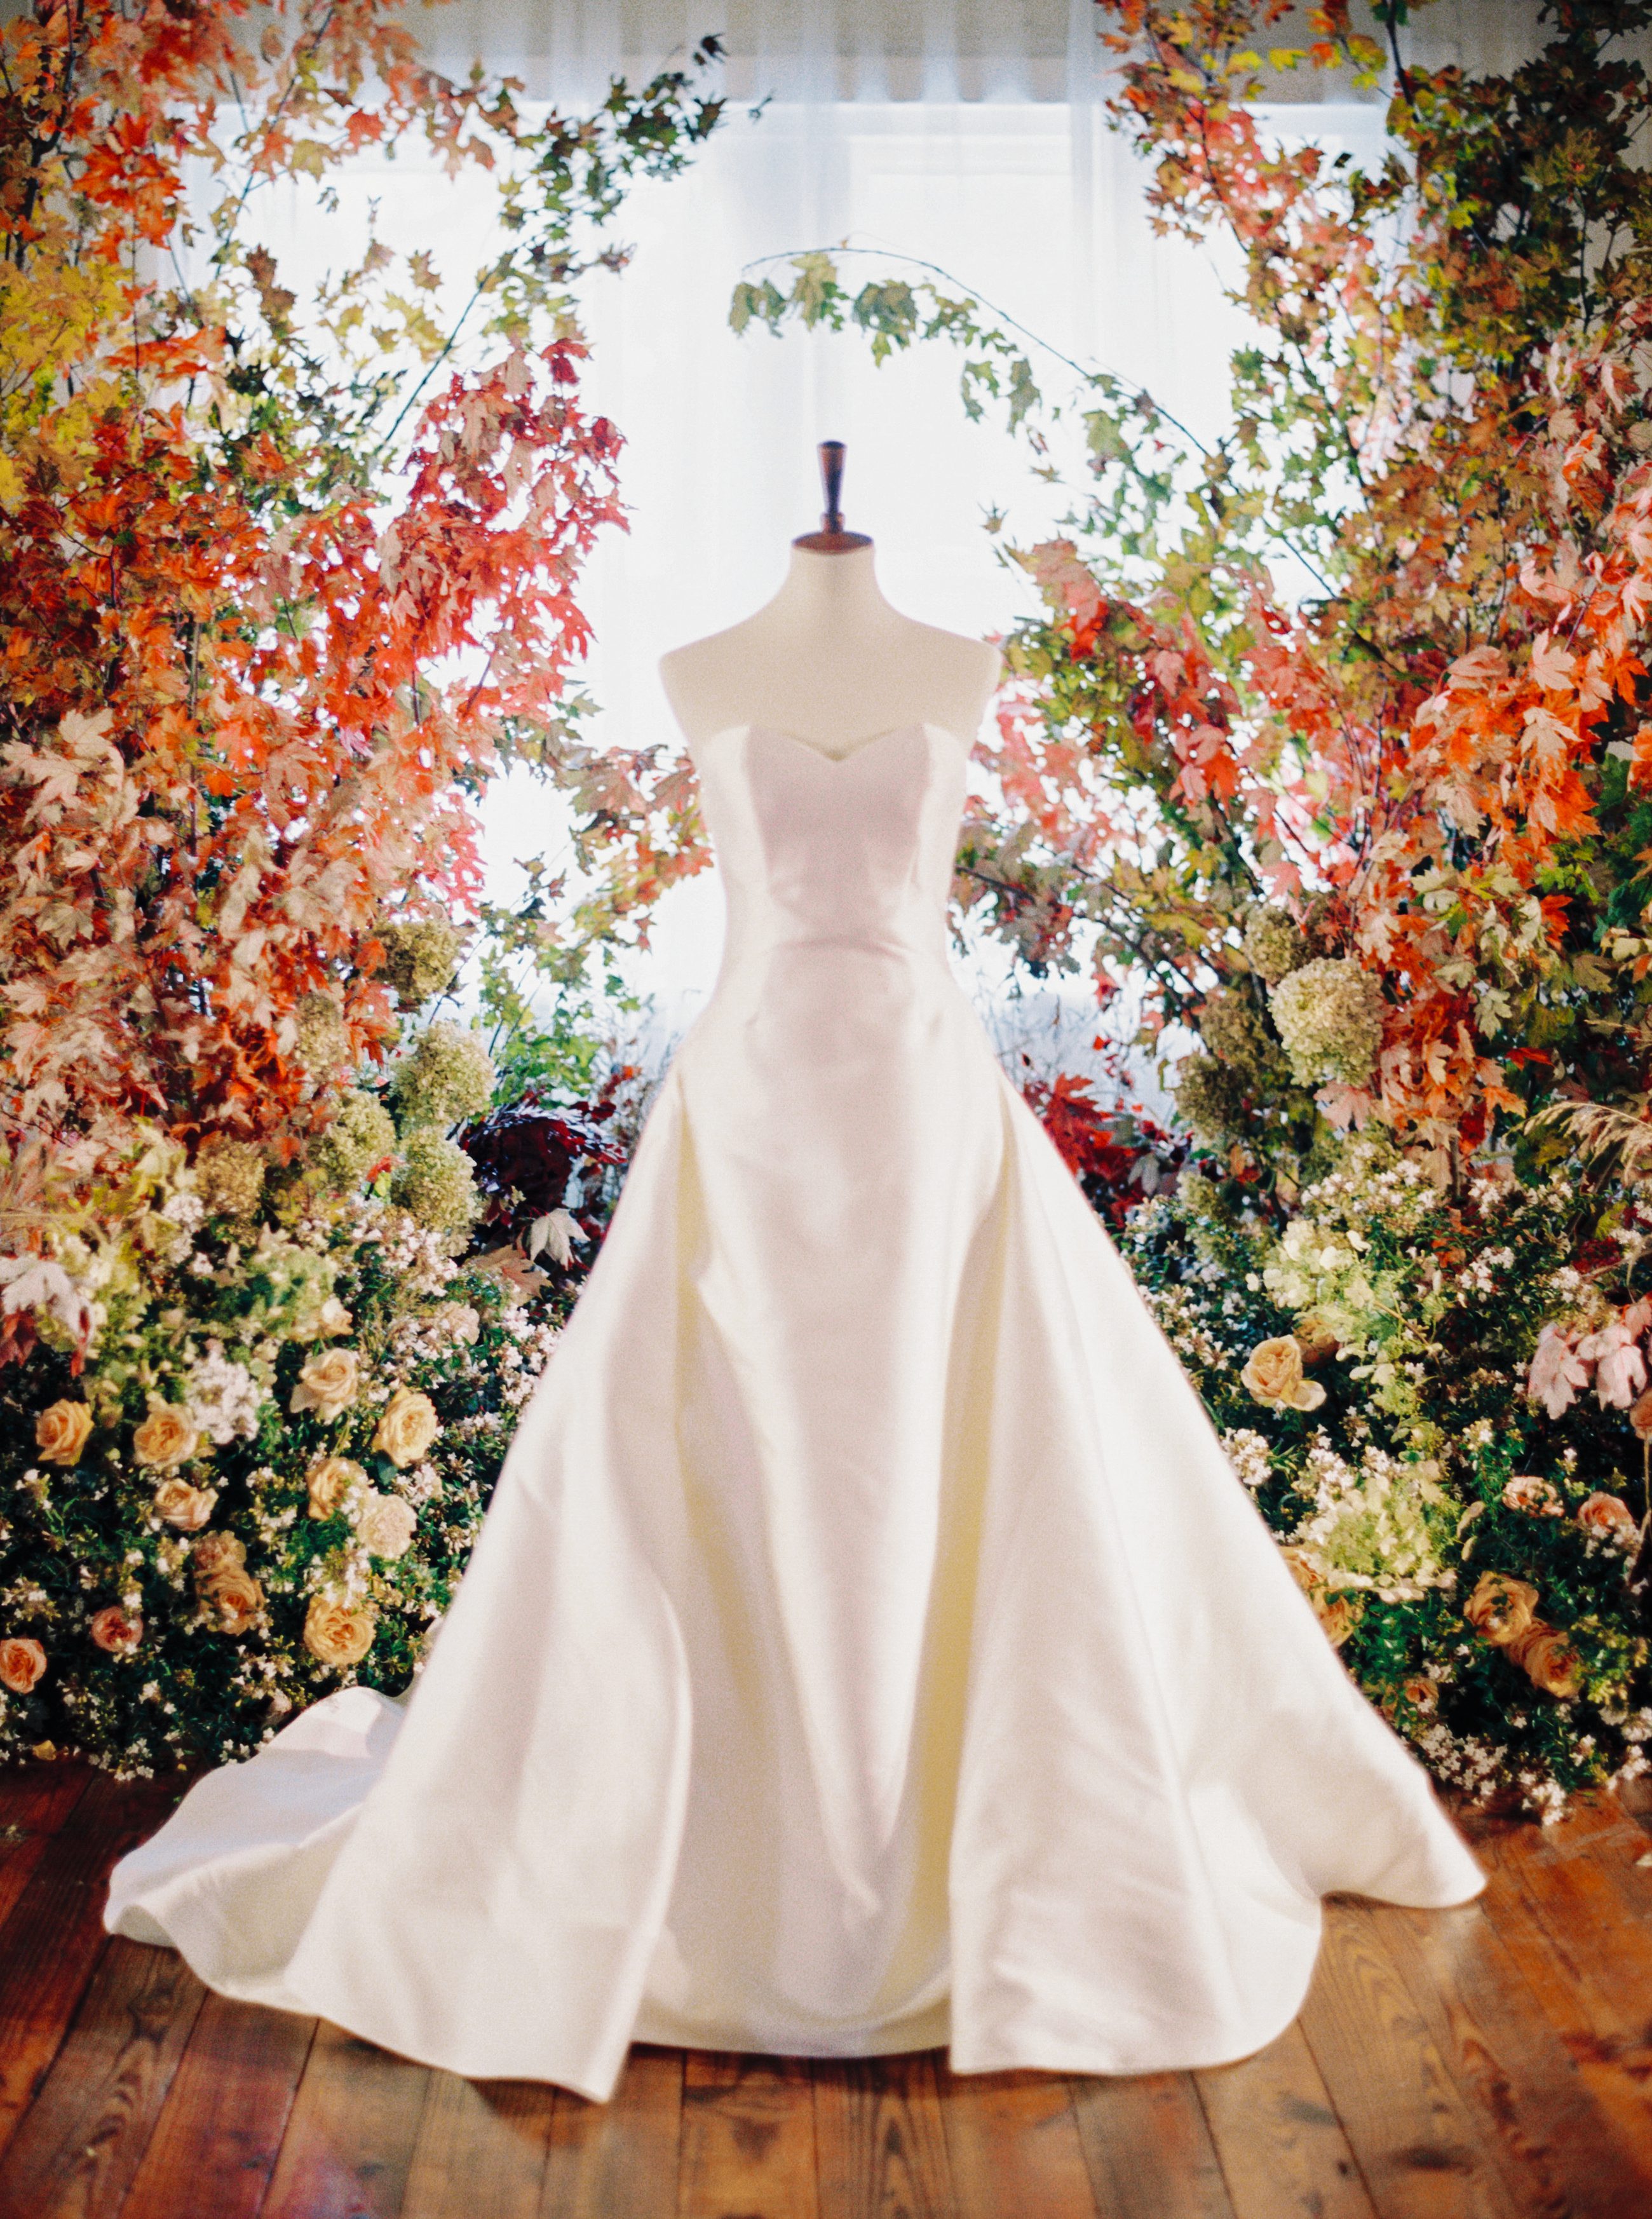 wedding gown in front of a fall leaves wedding ceremony altar at a Brik Venue wedding in Fort Worth Texas planned and designed by Fort Worth wedding planner Birds of a Feather Events